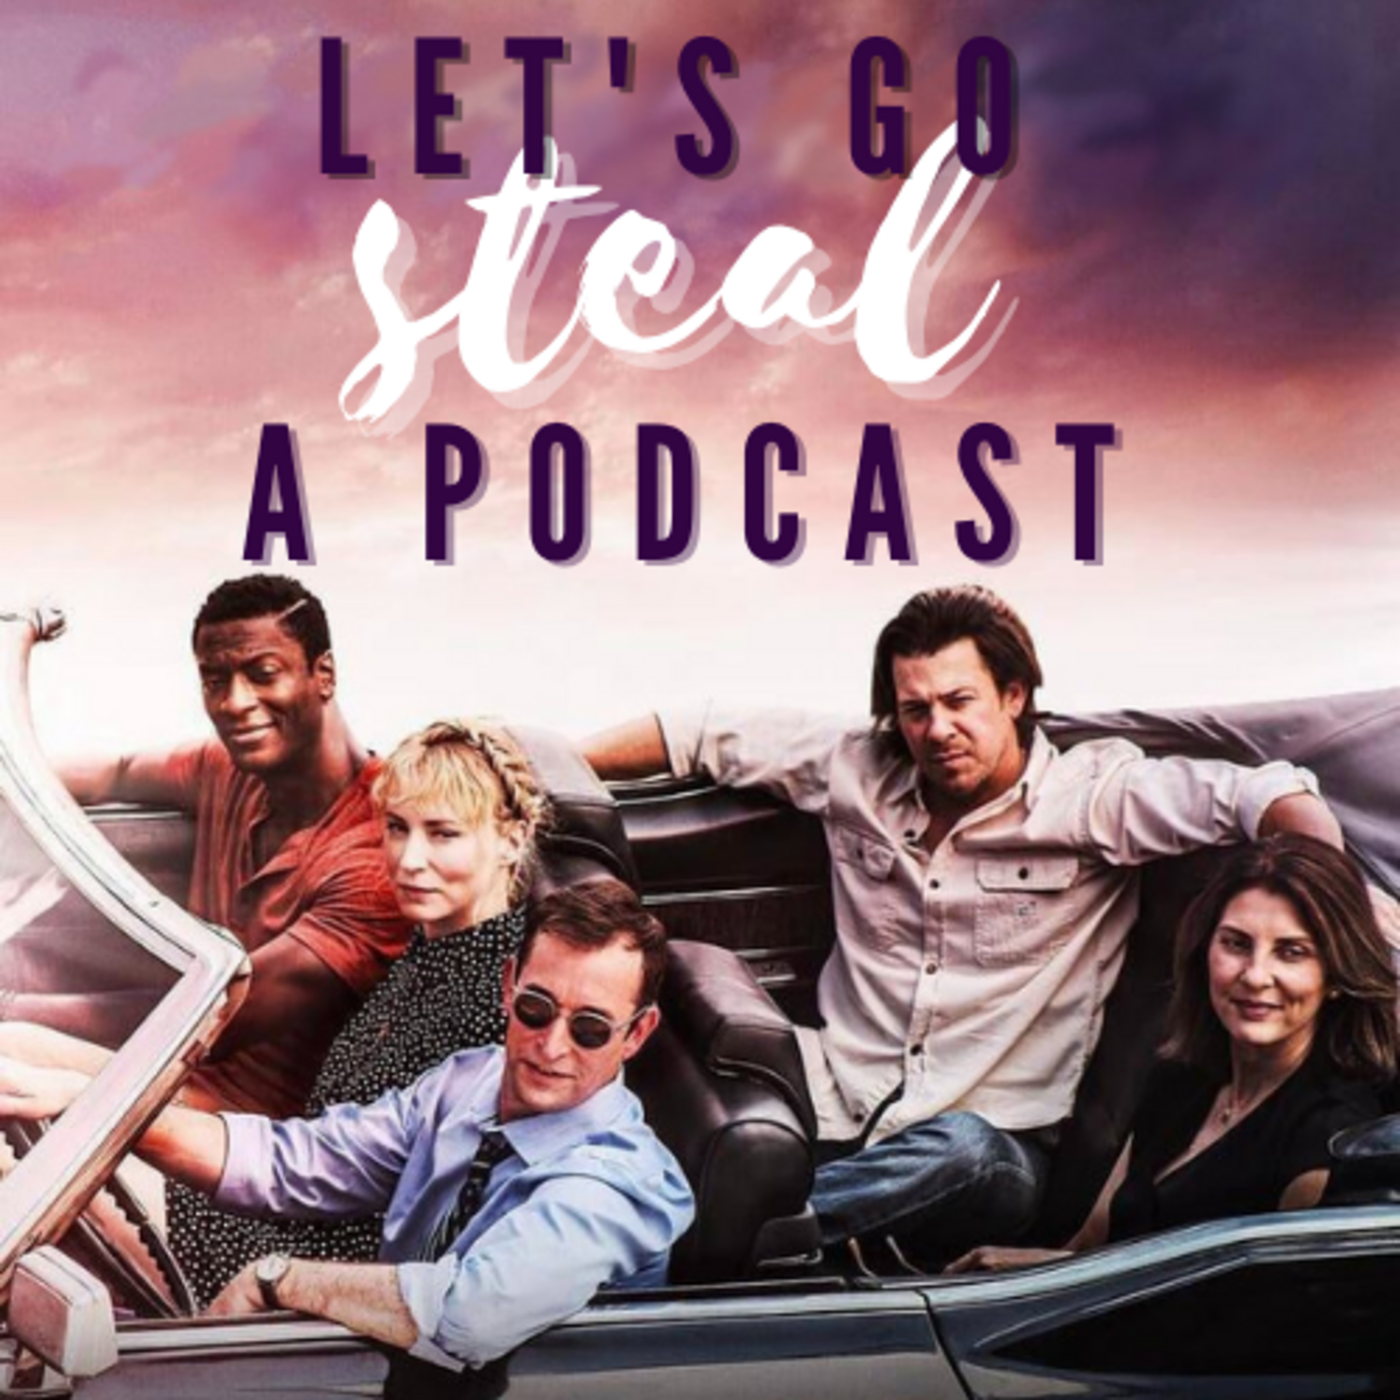 Let's Go Steal a Podcast